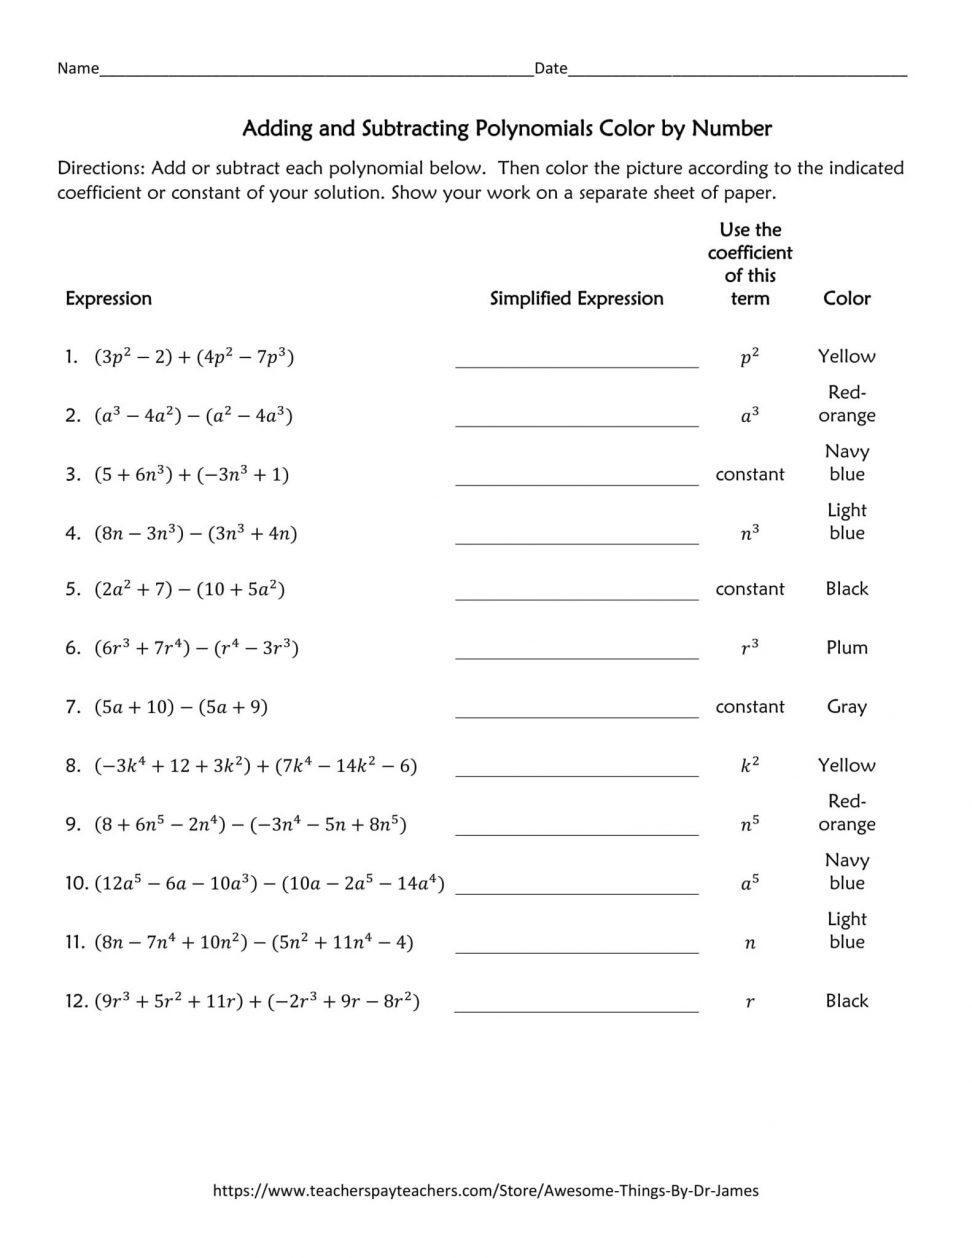 adding-and-subtracting-polynomials-worksheet-db-excel